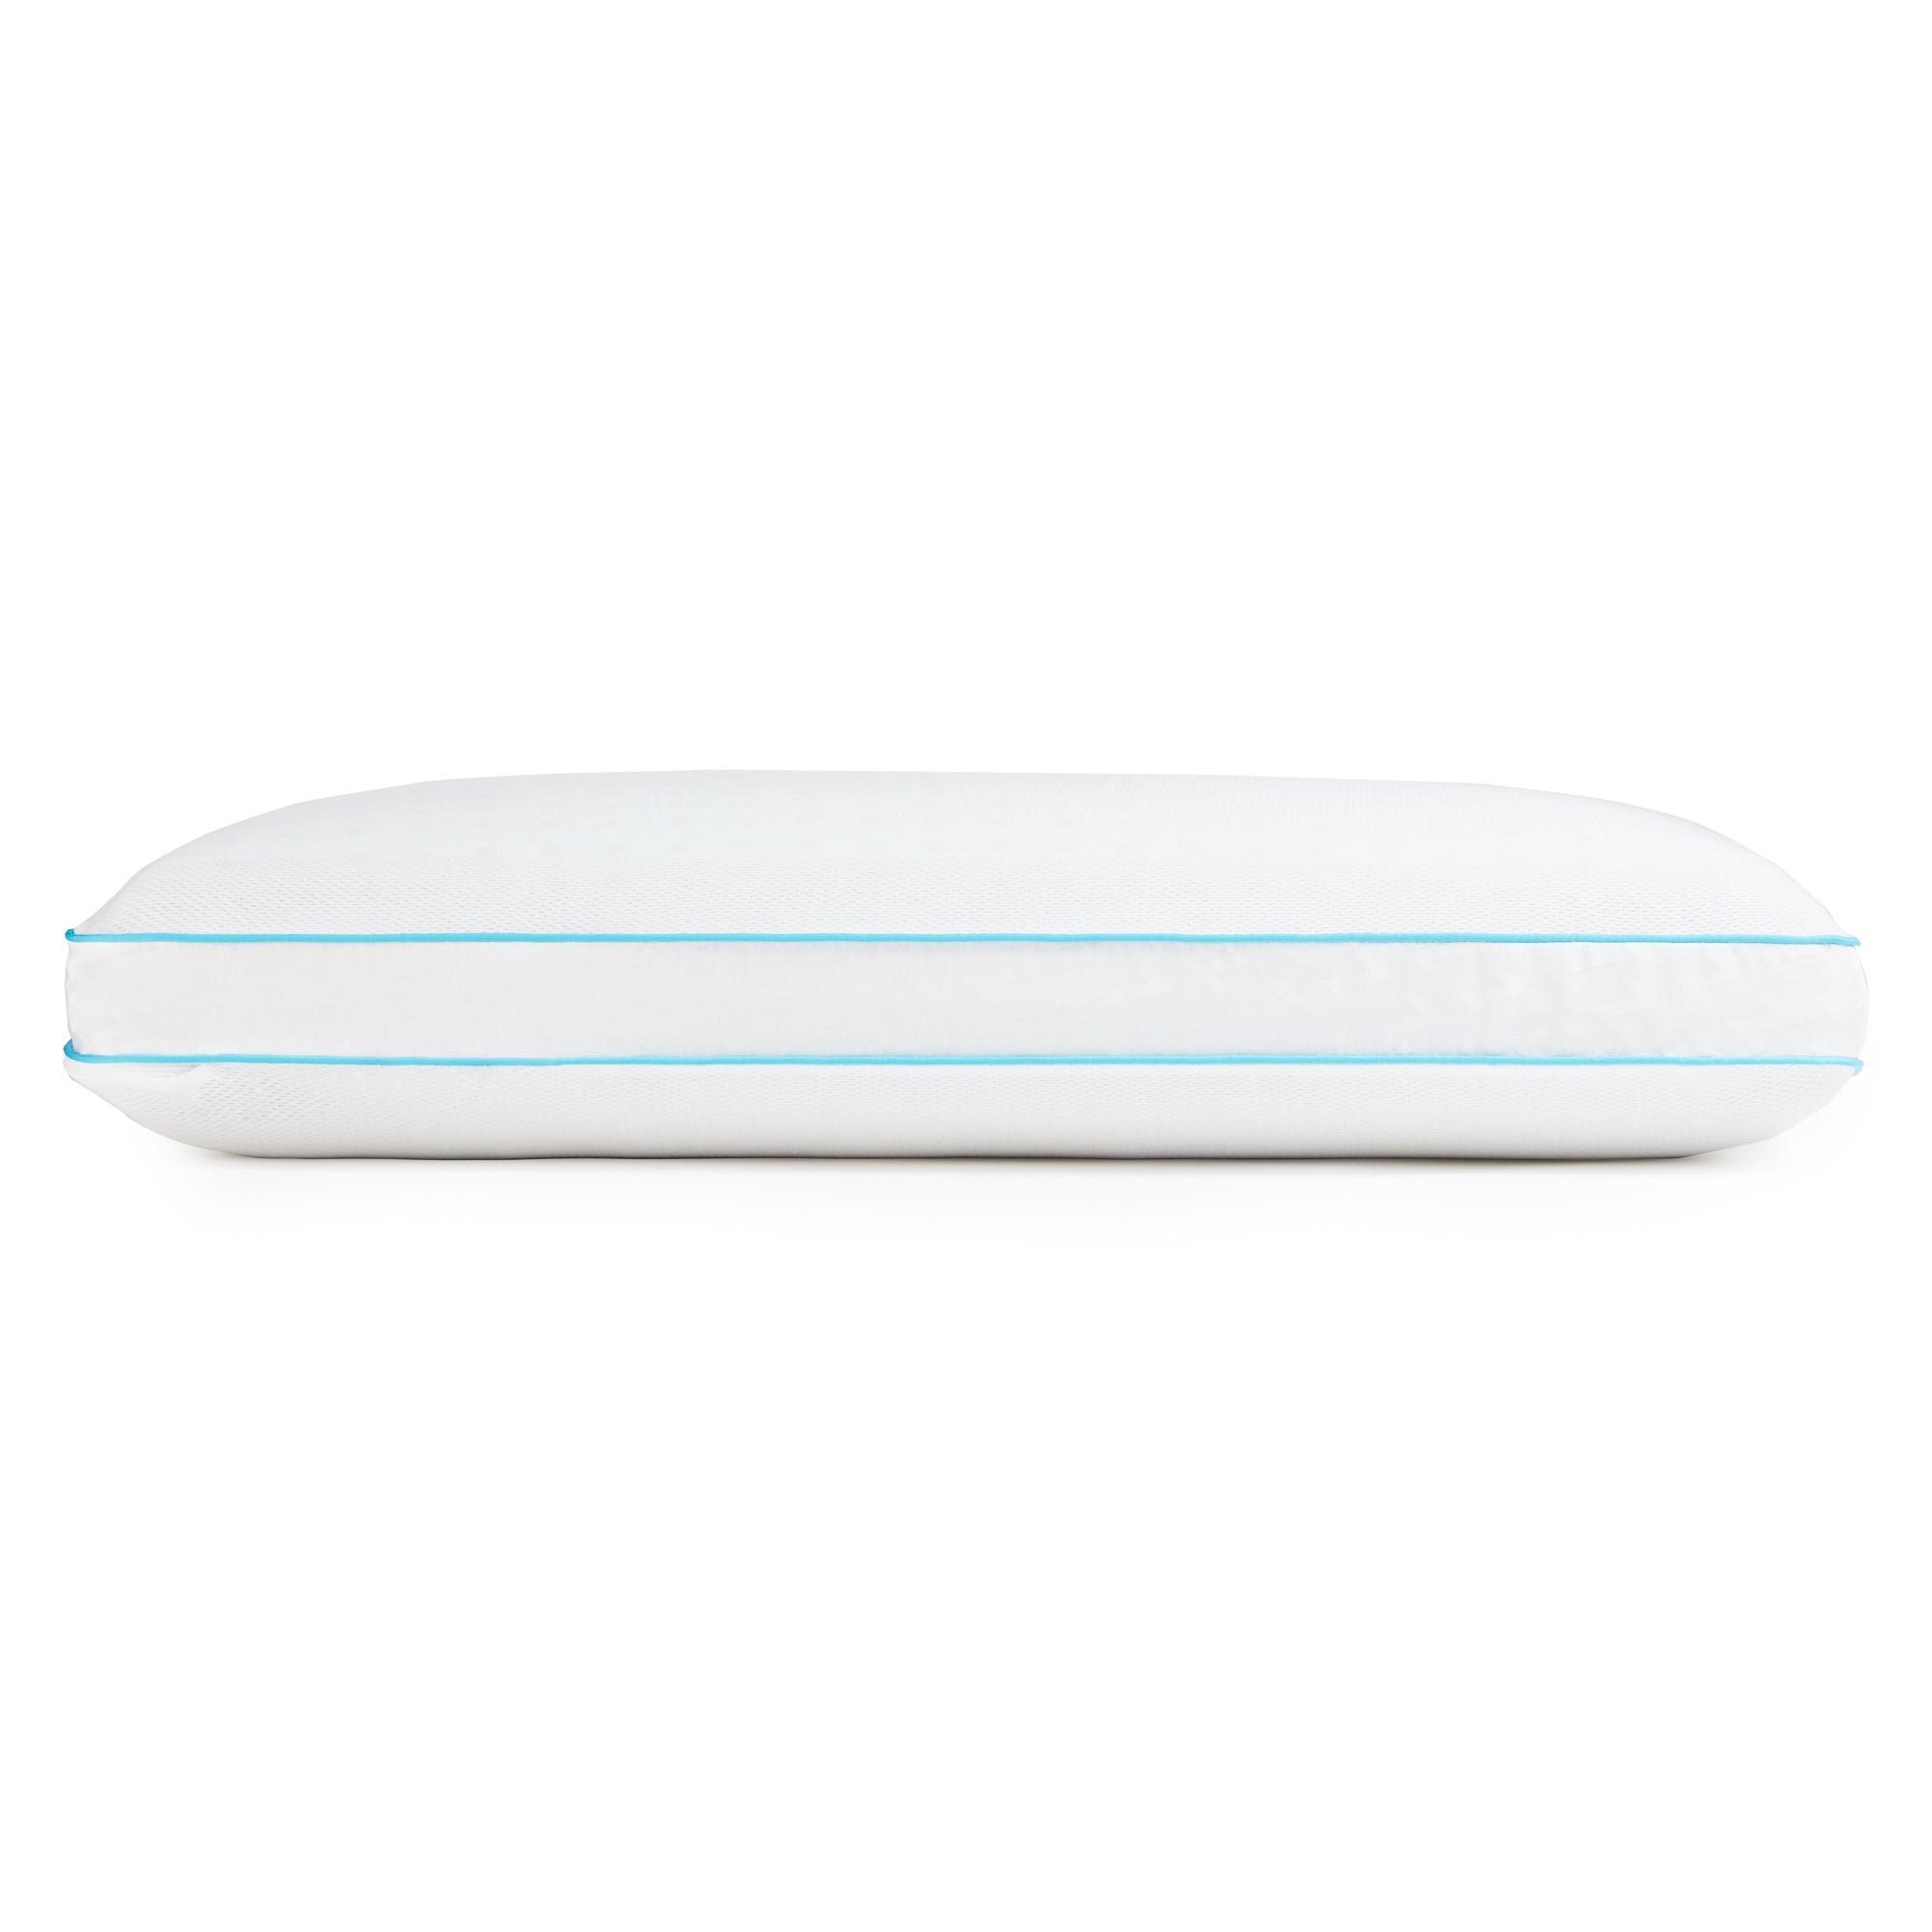 CarbonCool™ LT + Omniphase® Pillow